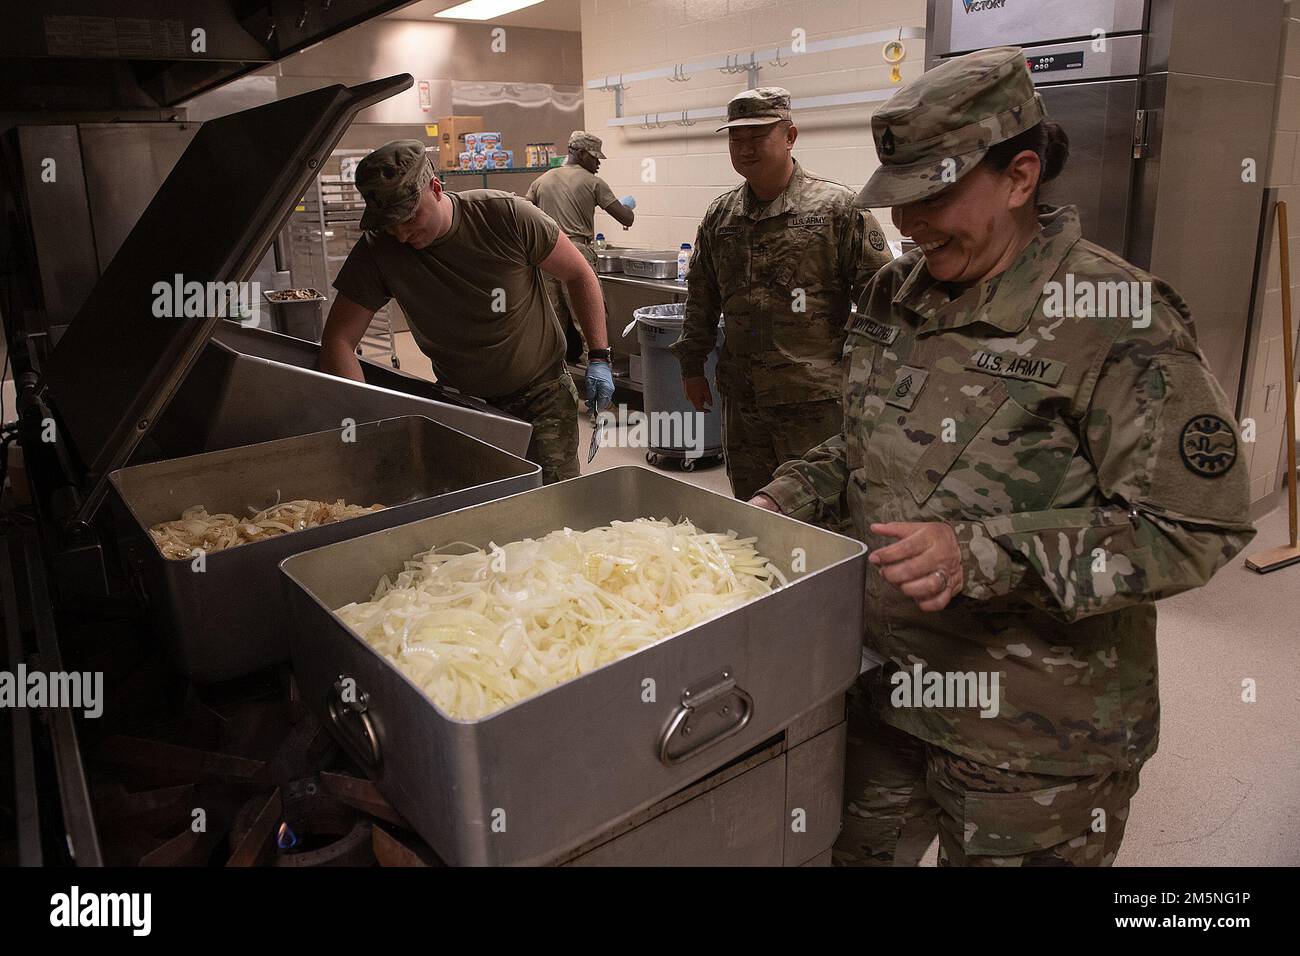 Idaho Army National Guard Sgt. 1st. Class Gladys Montelongo checks the progress of food preparation.    Napoleon Bonaparte is attributed as saying - “An army marches on it’s stomach.” The saying conveys the importance that soldiers in the field cannot be effective unless they are well fed.    The Idaho Army National Guard's 2-116th Combined Arms Battalion was in the field on the Orchard Combat Training Center in the final days of March, in preparation for an upcoming deployment in support of Operation Spartan Shield.    The training was rigorous and diverse. While each company completed their Stock Photo